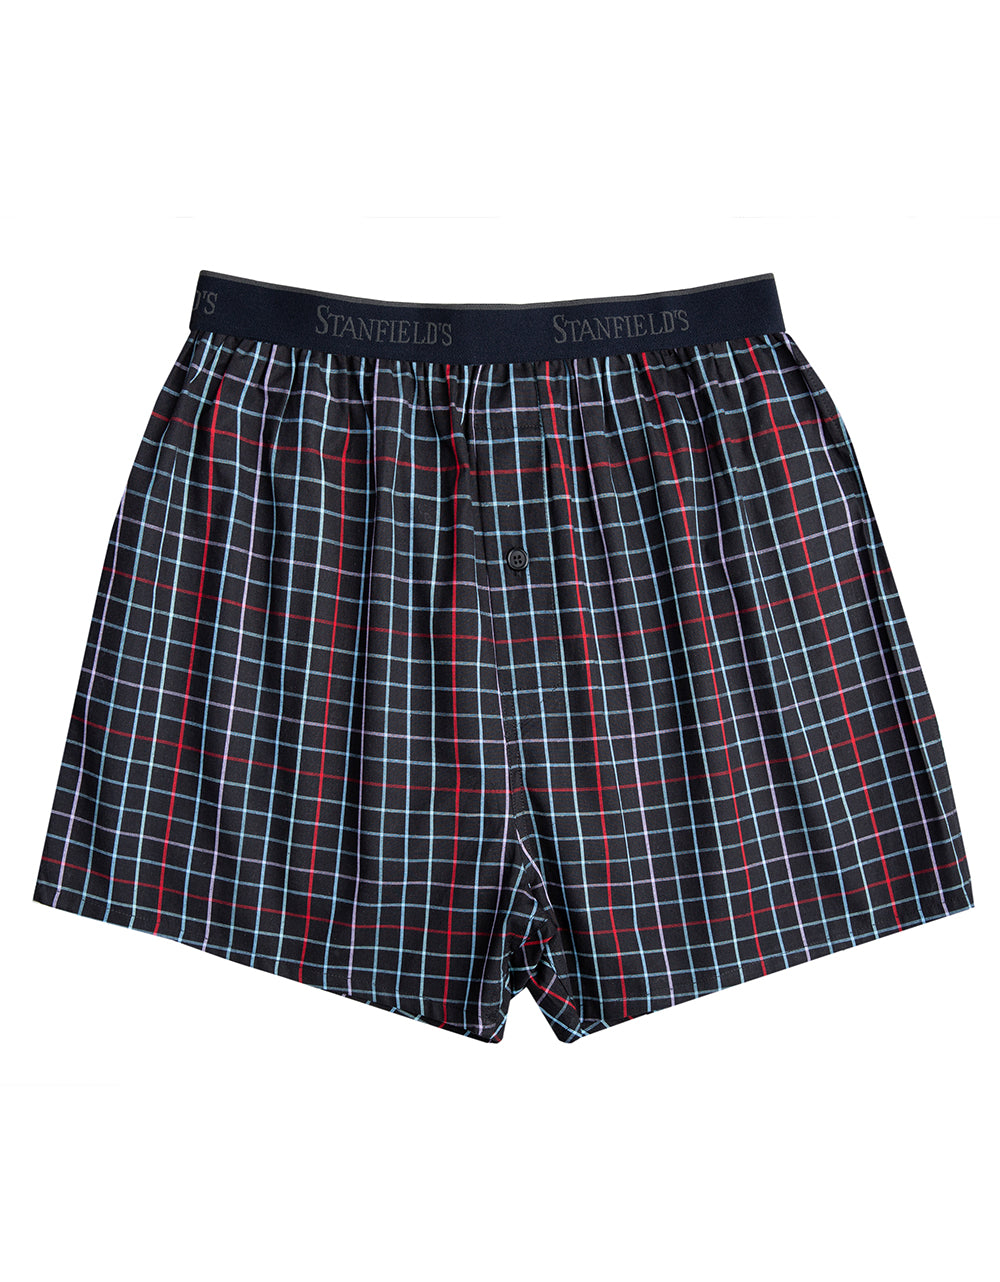 Boxers (Modern Fit Woven Cotton ) | Stanfields.com